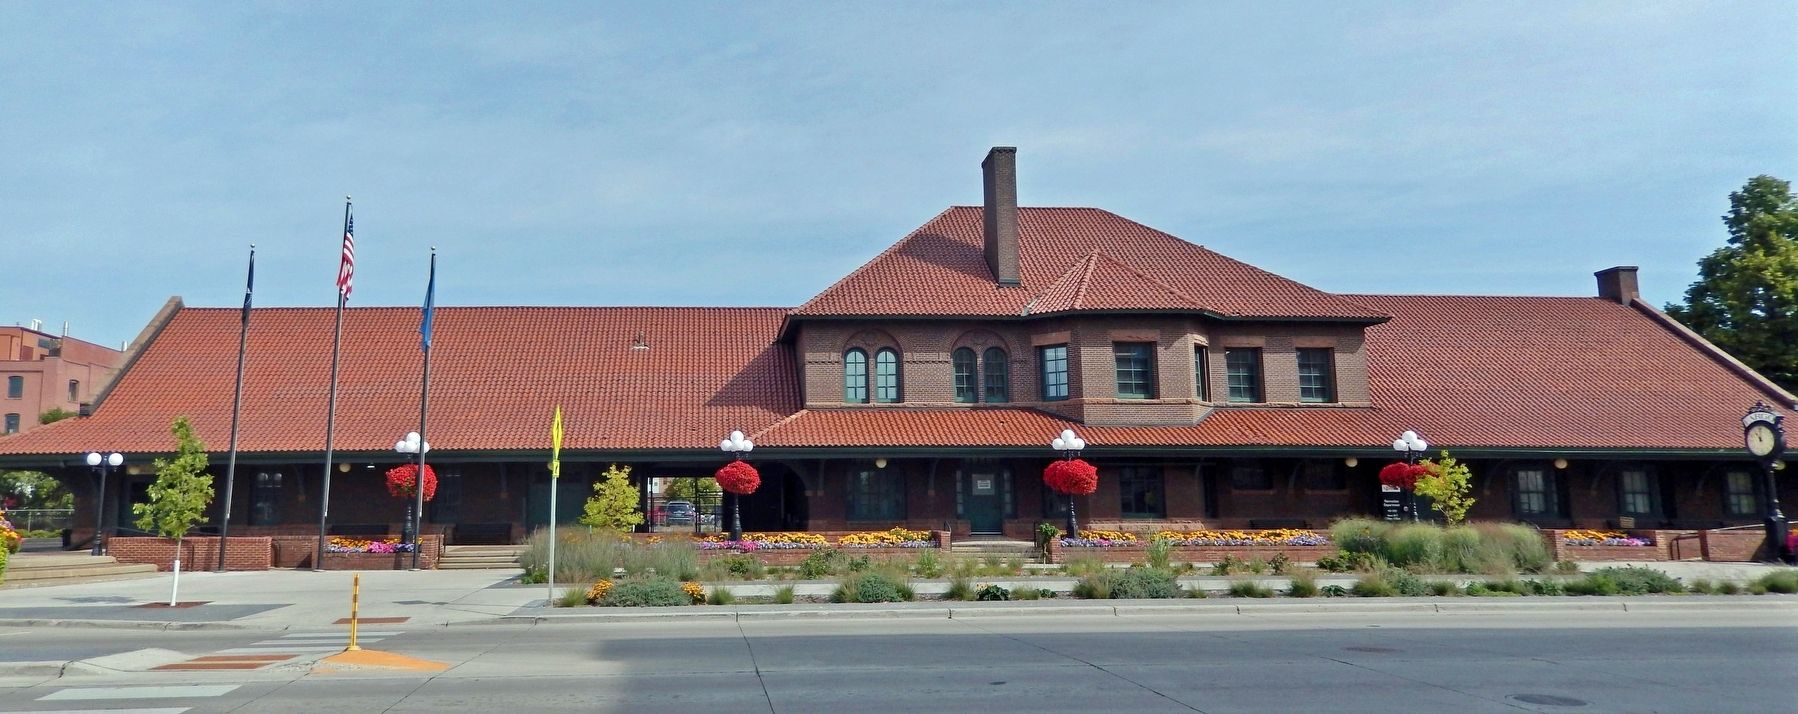 Northern Pacific Railroad Depot (<i>south/front elevation</i>) image. Click for full size.